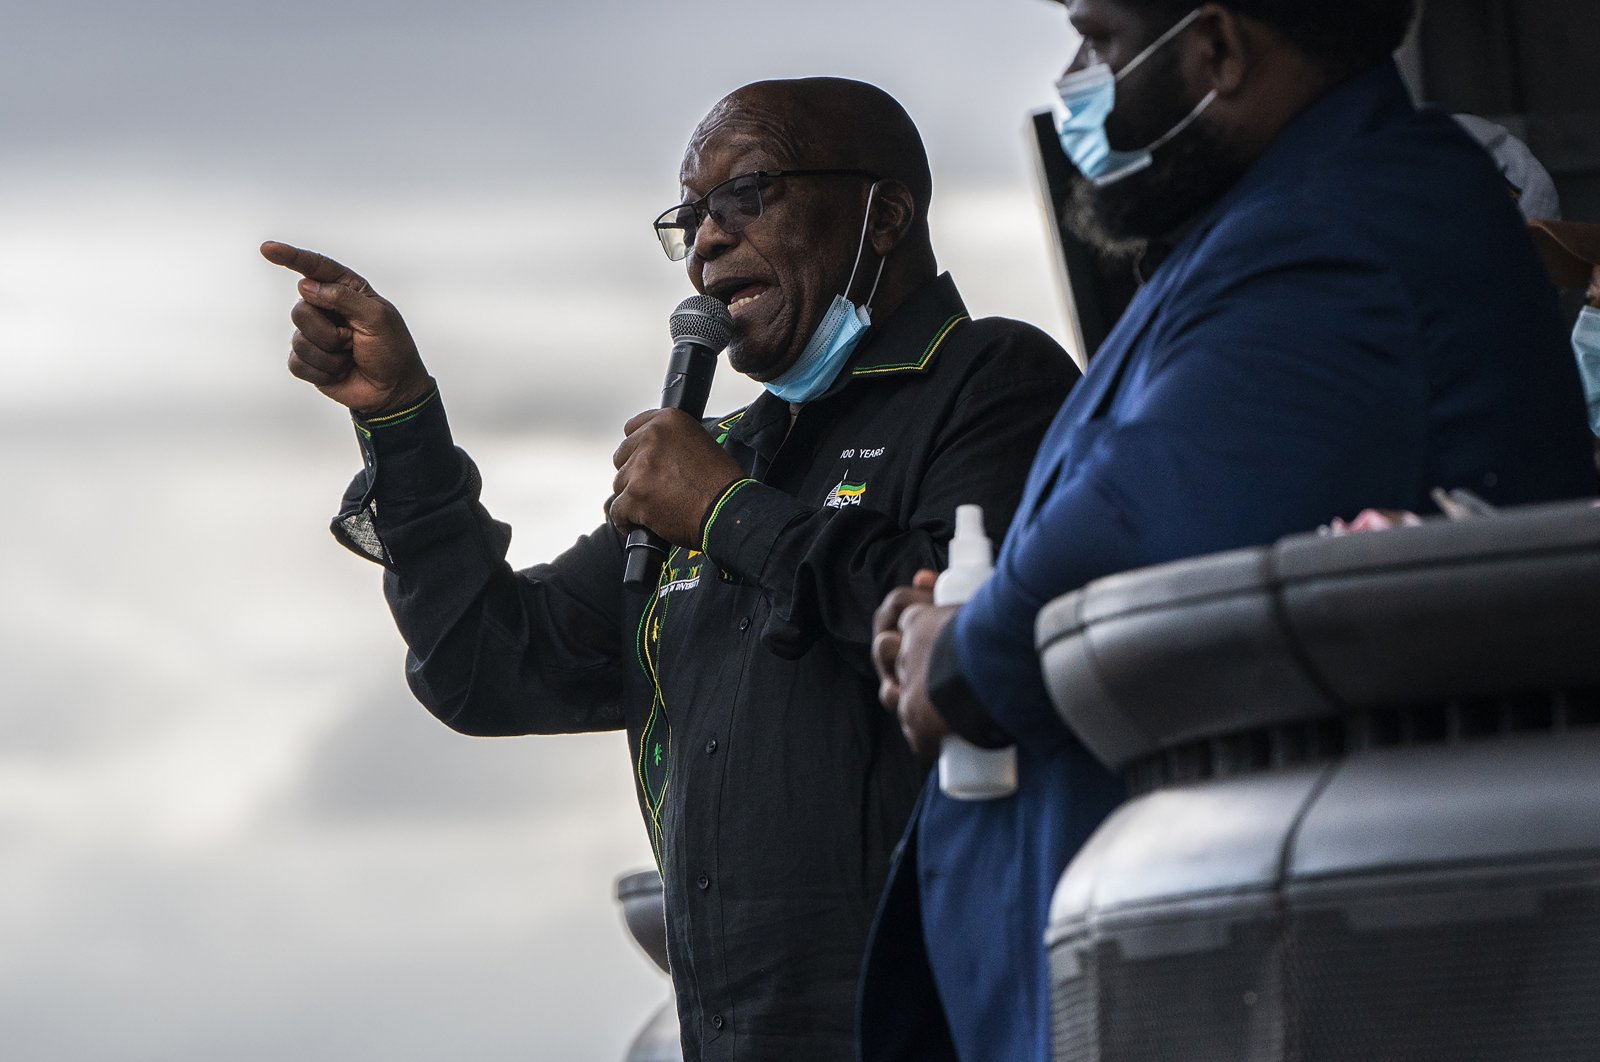 Former South African President Zuma was arrested